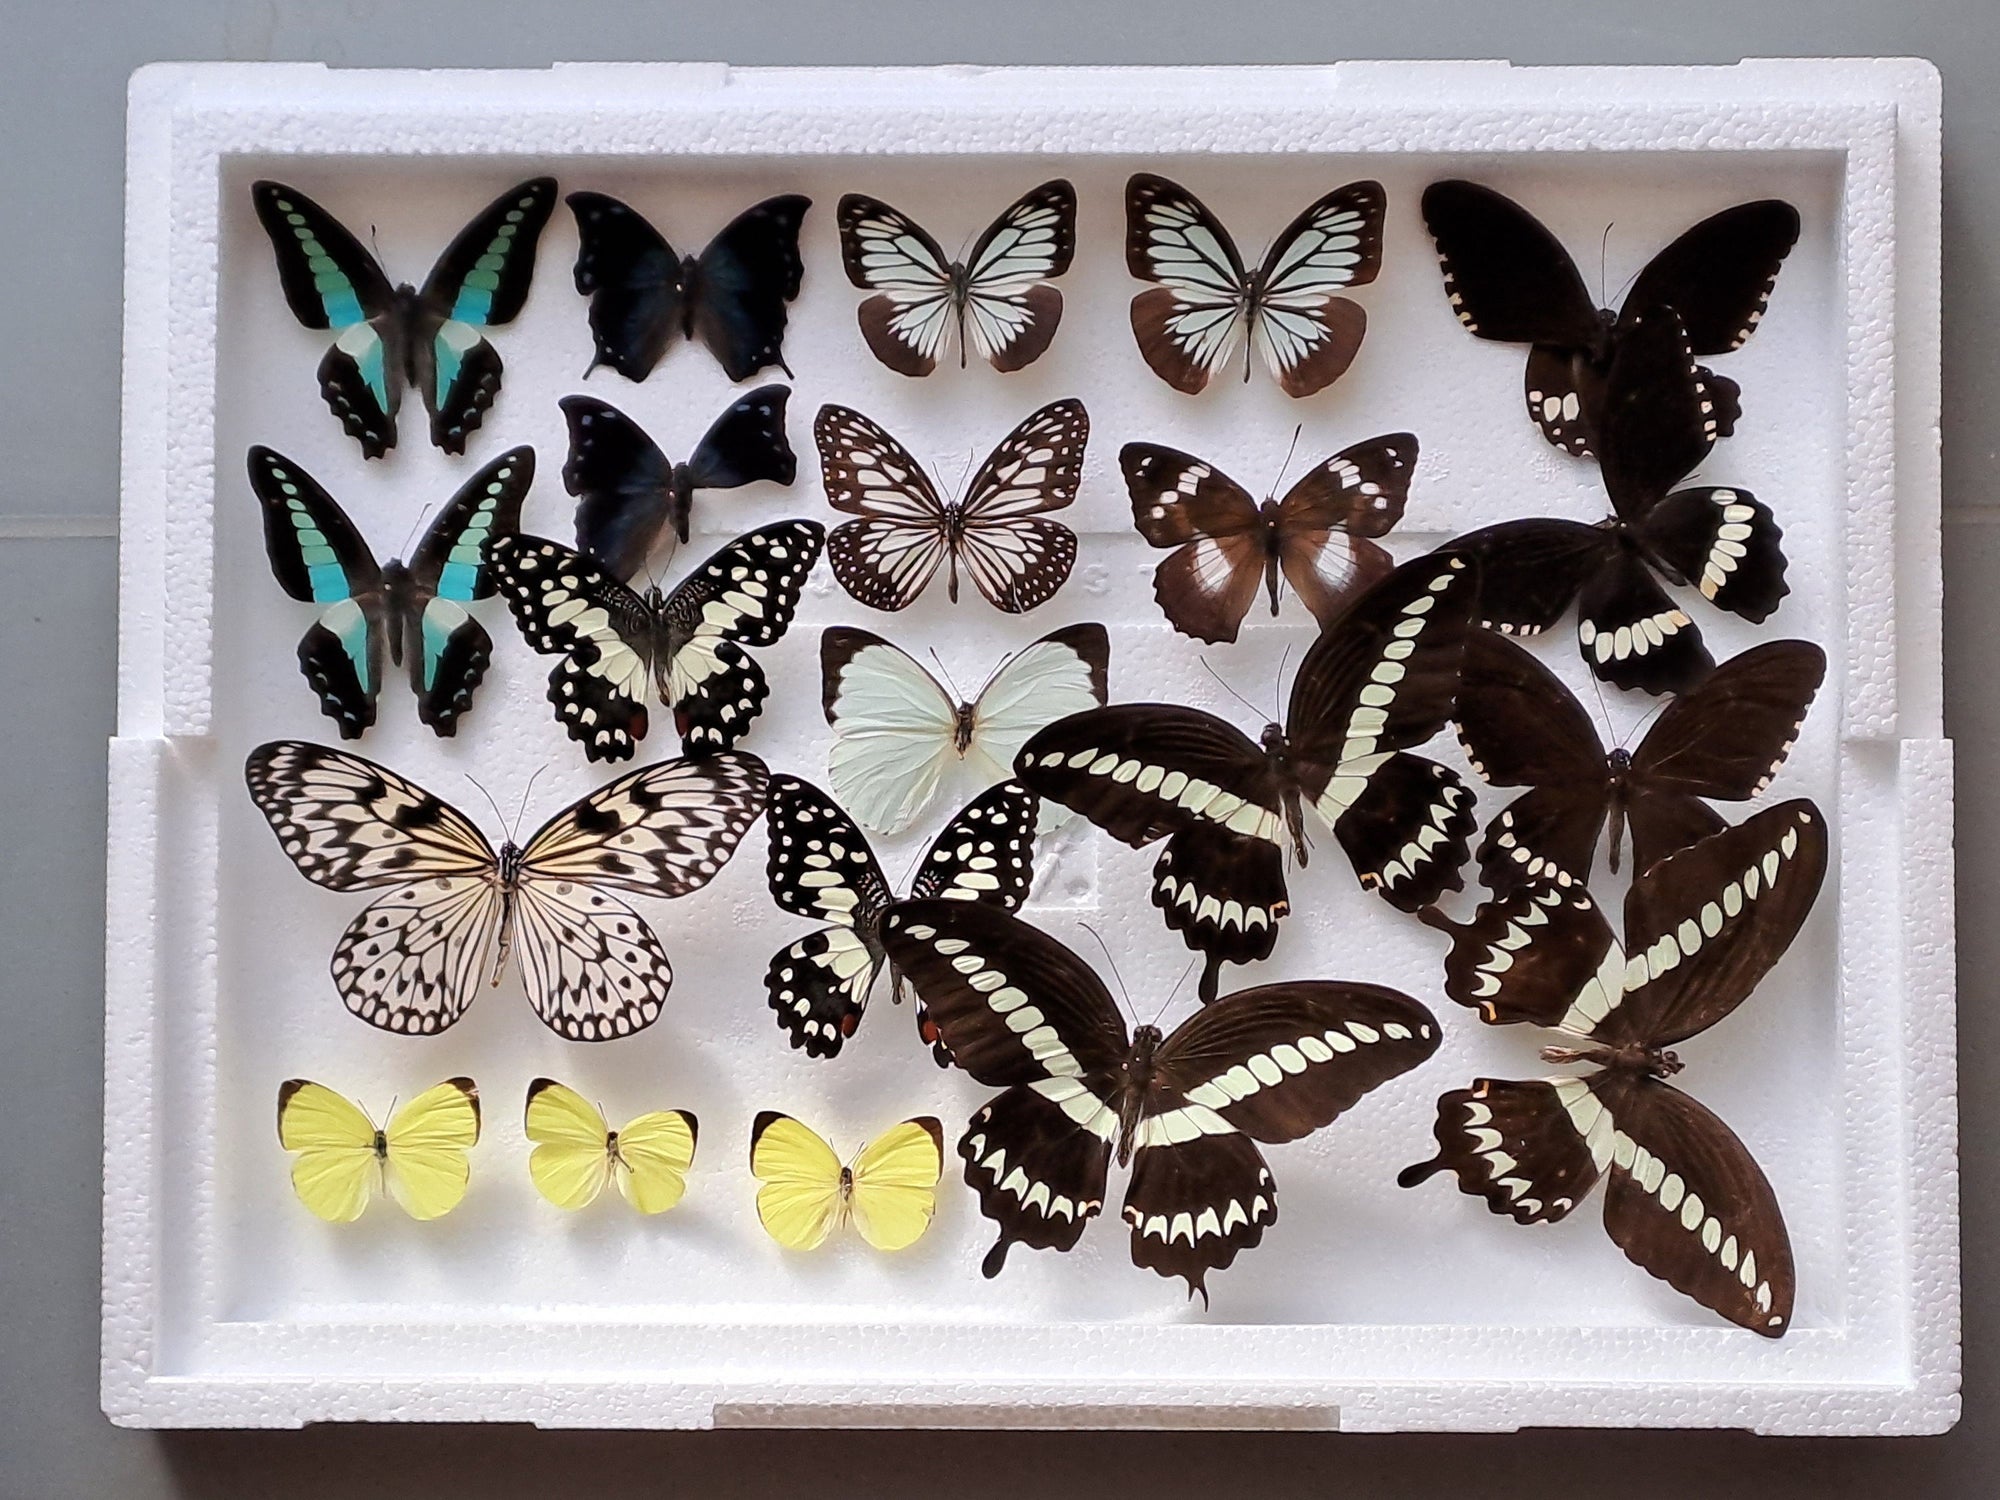 DAMAGED BUTTERFLIES as seen in photo. Broken specimens good for art and craft projects (BOX No. 16)